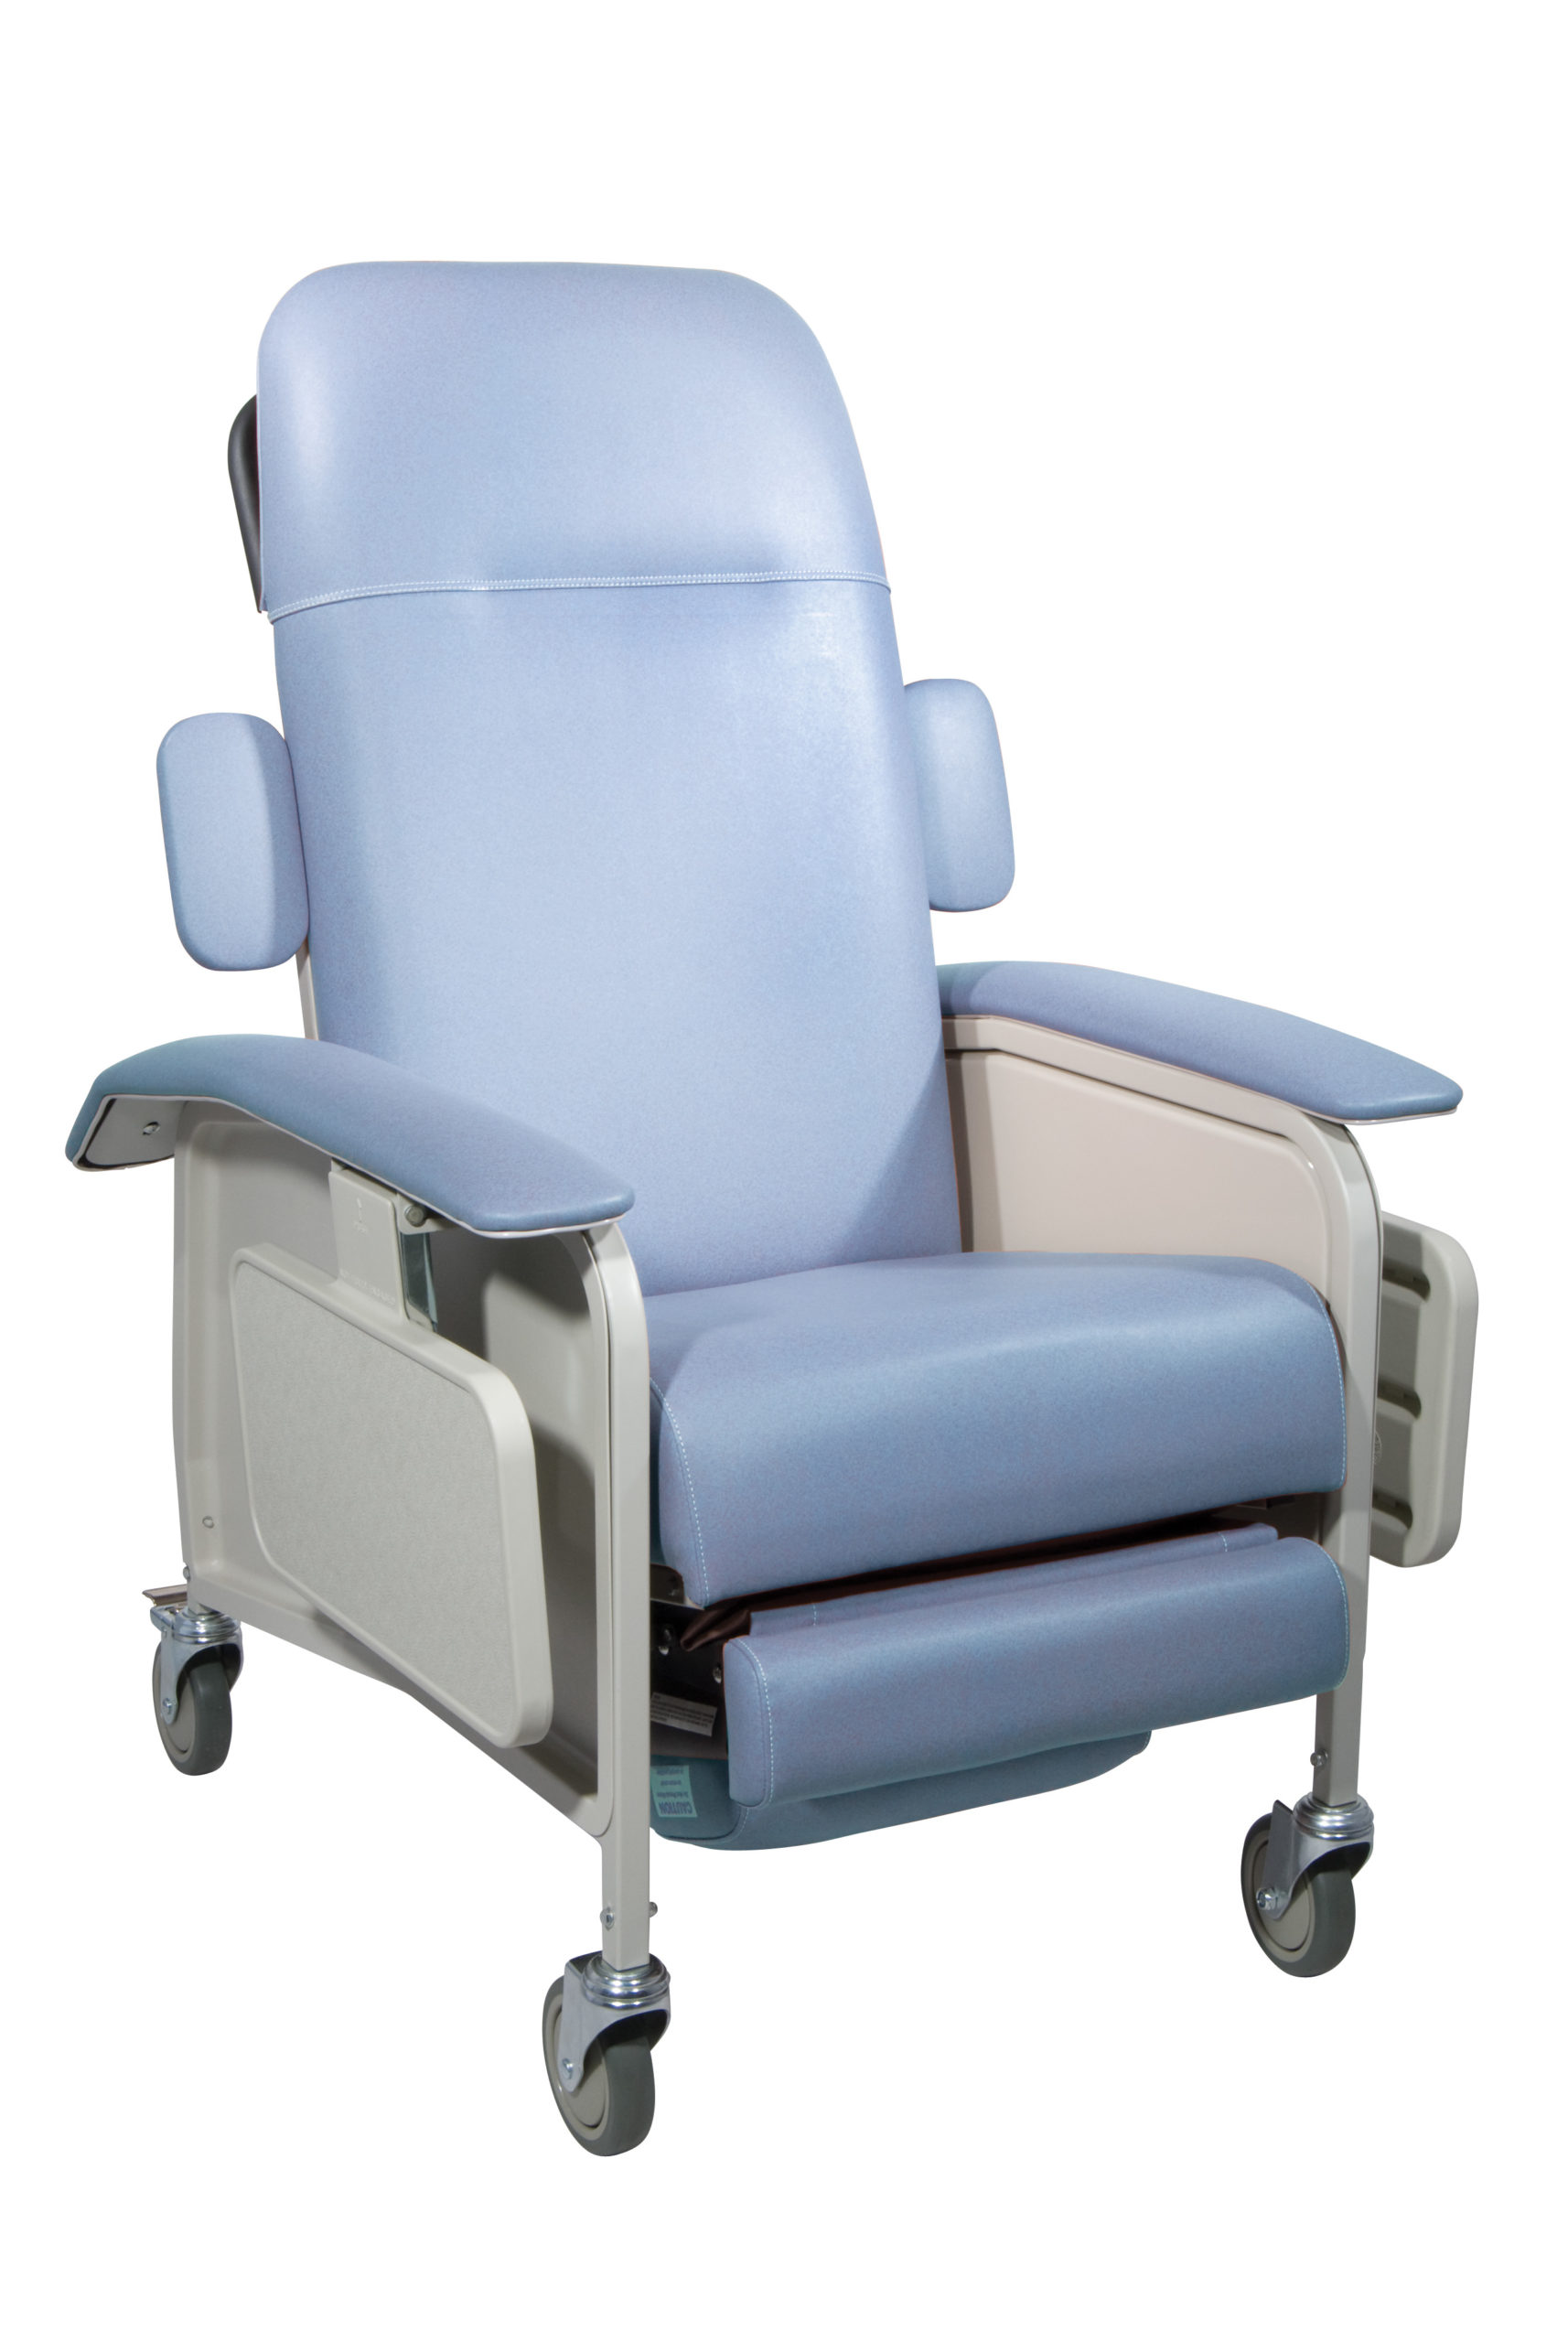 Padded Swivel Seat Cushion by Drive Medical -7966